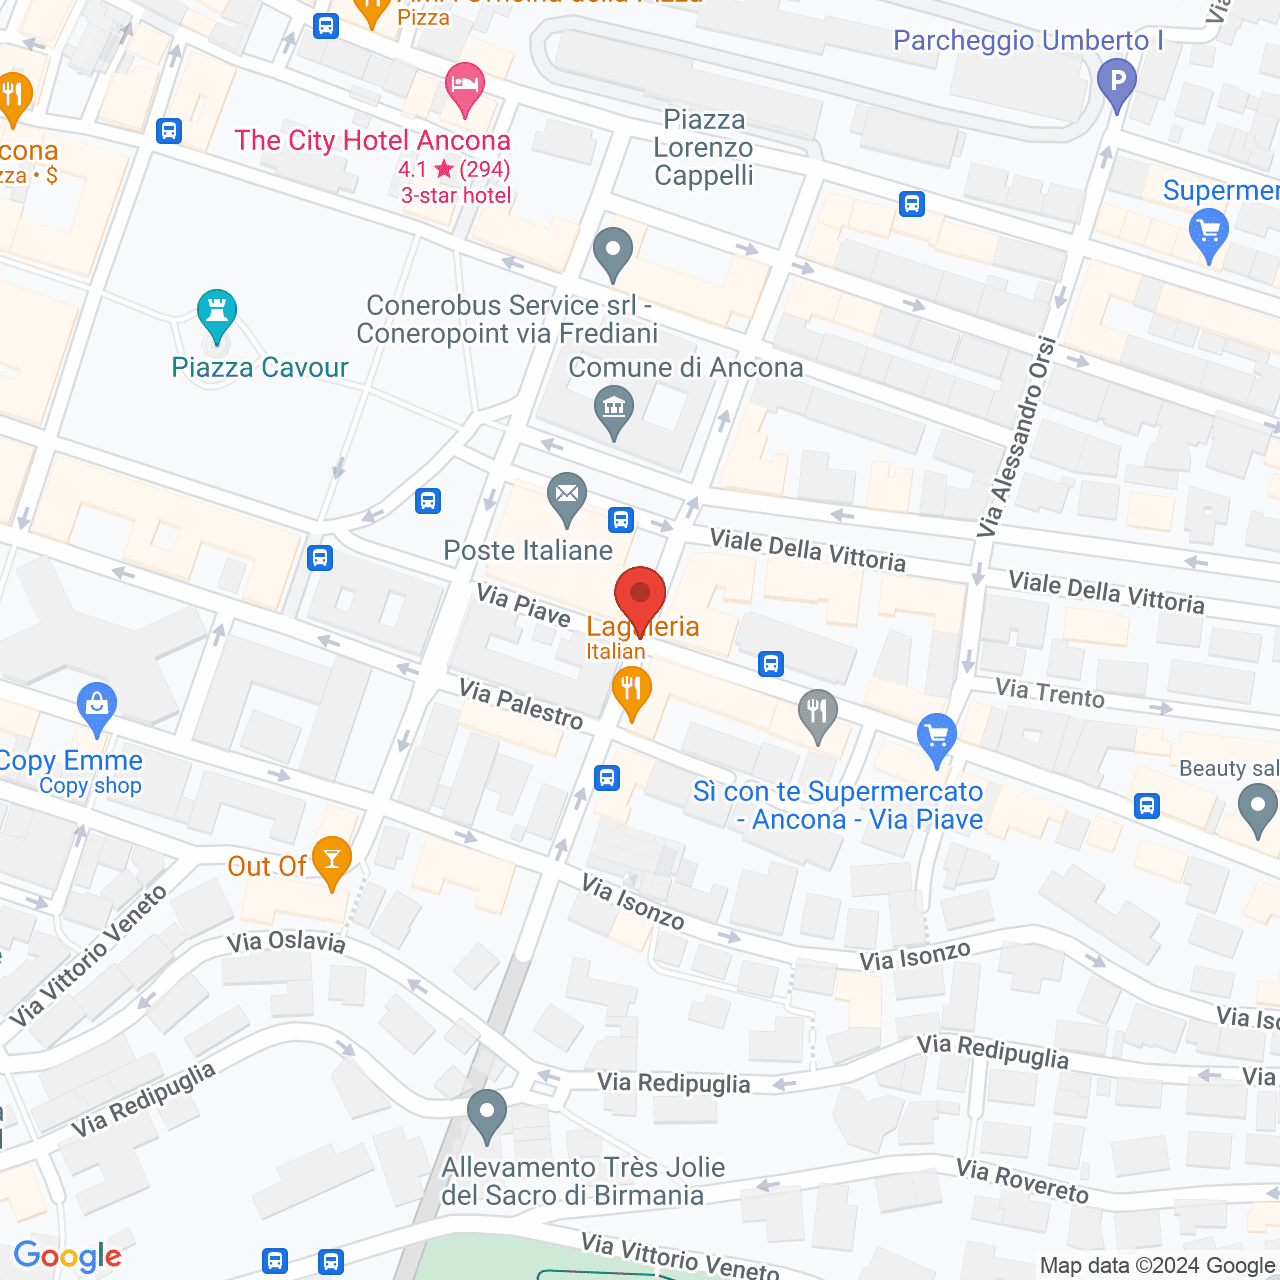 https://maps.googleapis.com/maps/api/staticmap?zoom=10&maptype=hybrid&scale=4&center=43.6158299,13.518915&markers=color:red%7C%7C43.6158299,13.518915&size=1000x1000&key=AIzaSyAQg6Liu52-a7wn17F9B-5c4QmJ9kTO3Mo